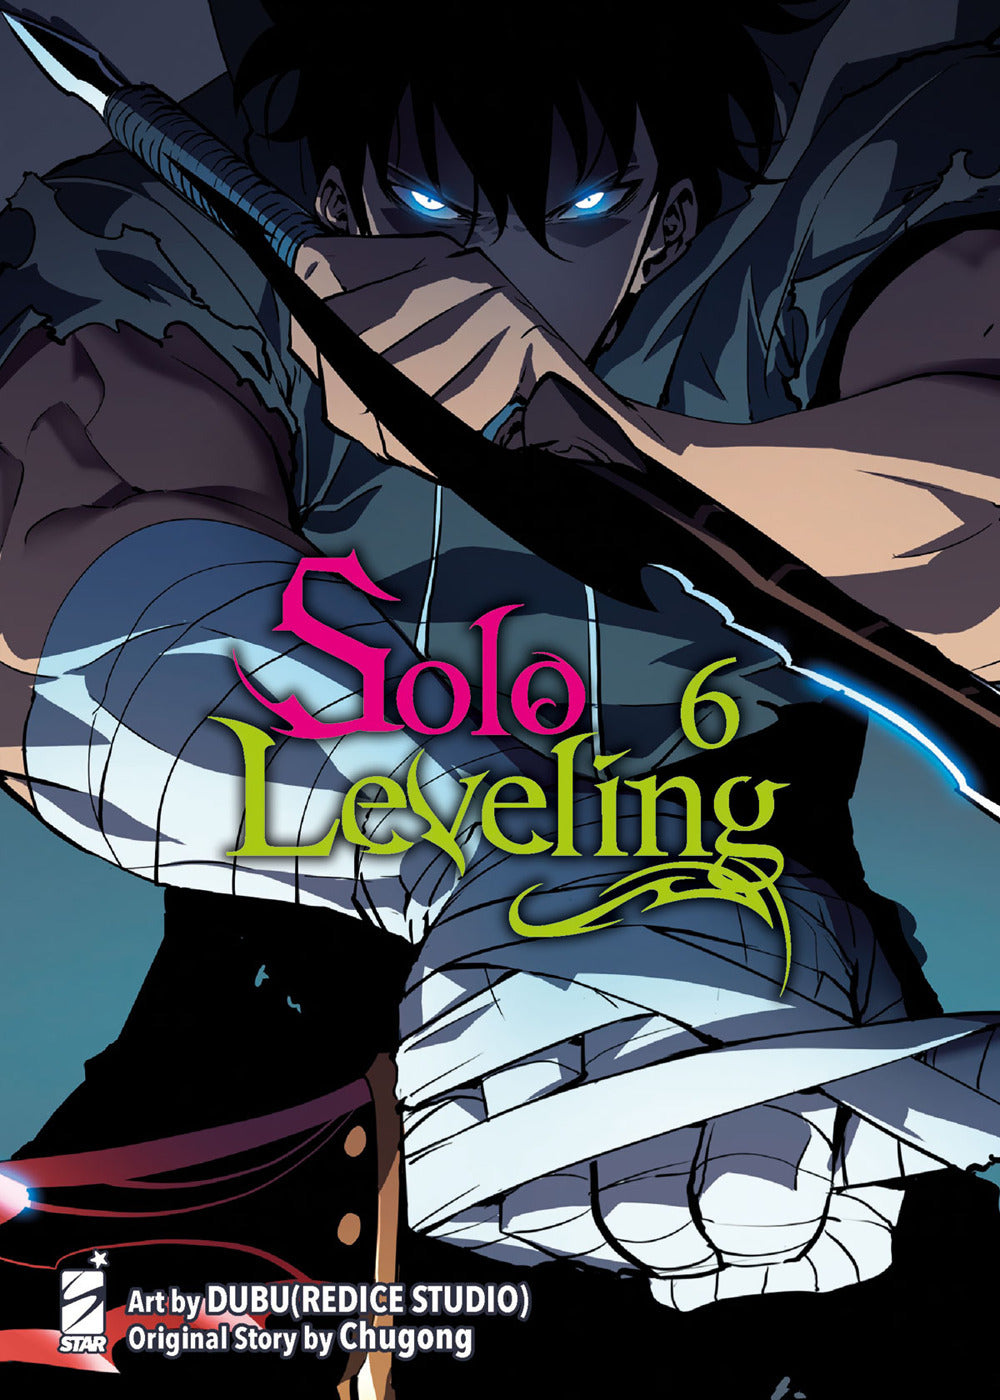 Solo leveling. Vol. 6